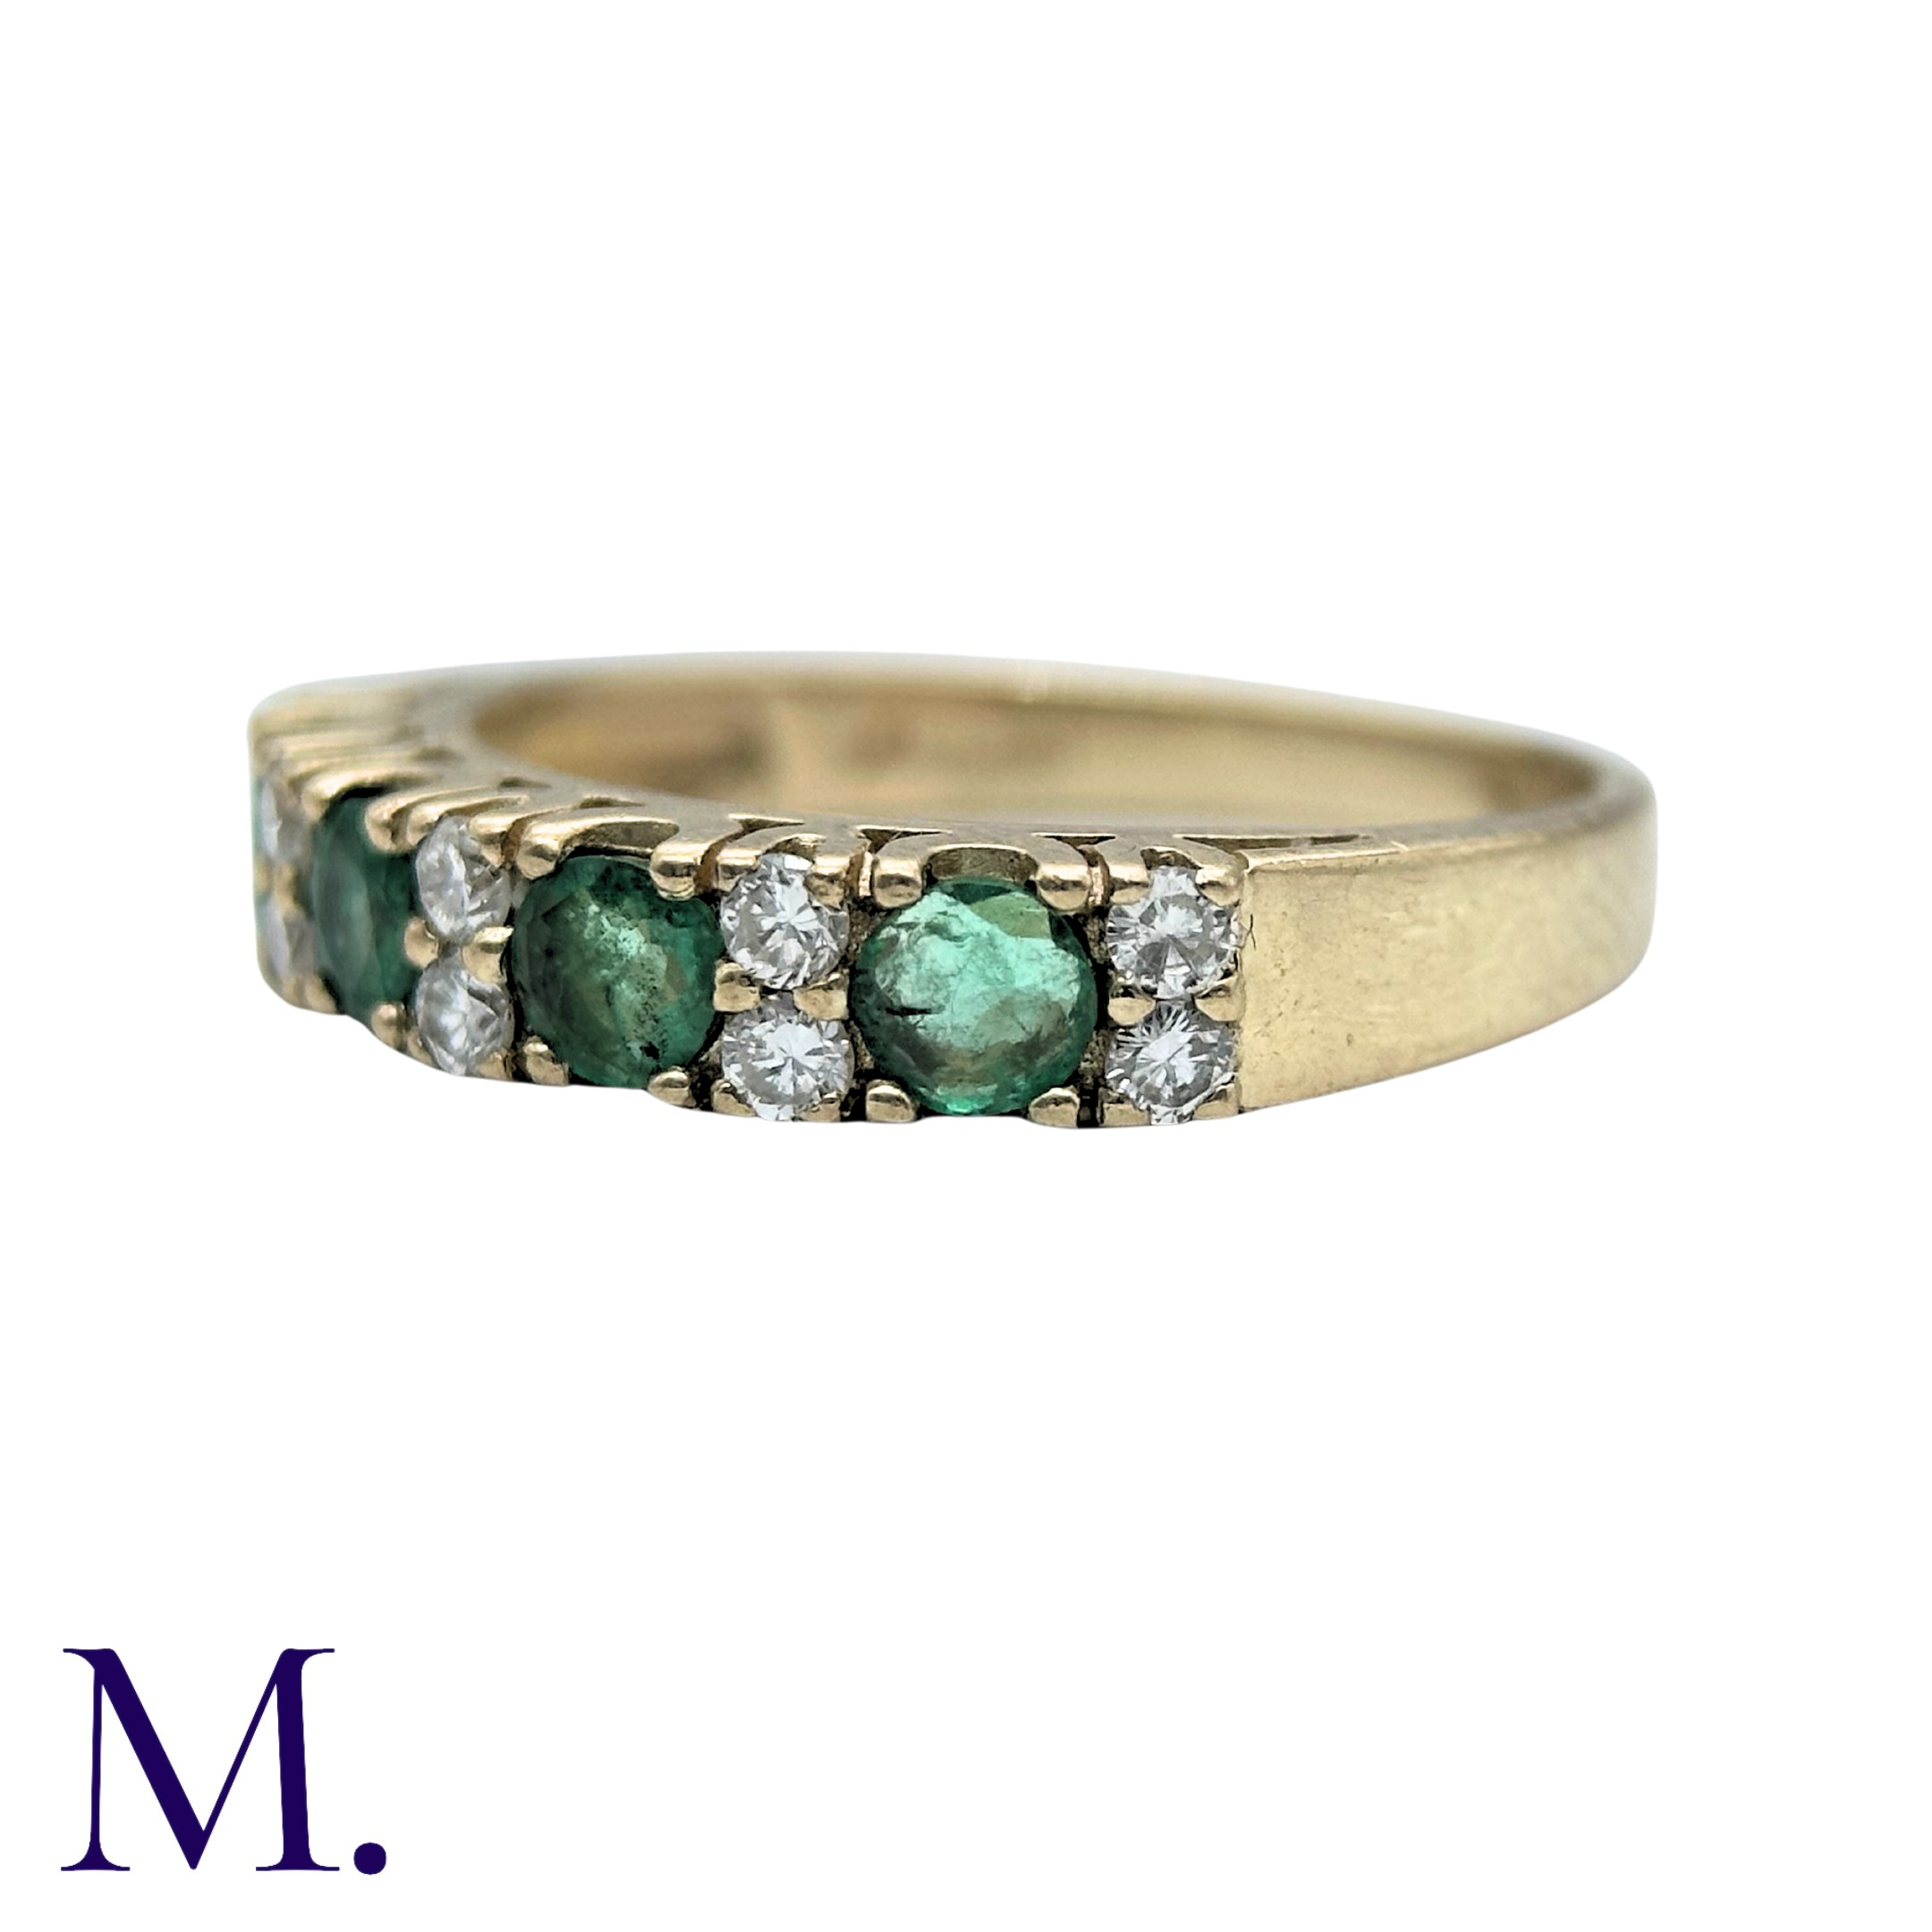 An Emerald And Diamond Ring in 9k yellow gold, set with four round cut emeralds punctuated with - Image 3 of 6